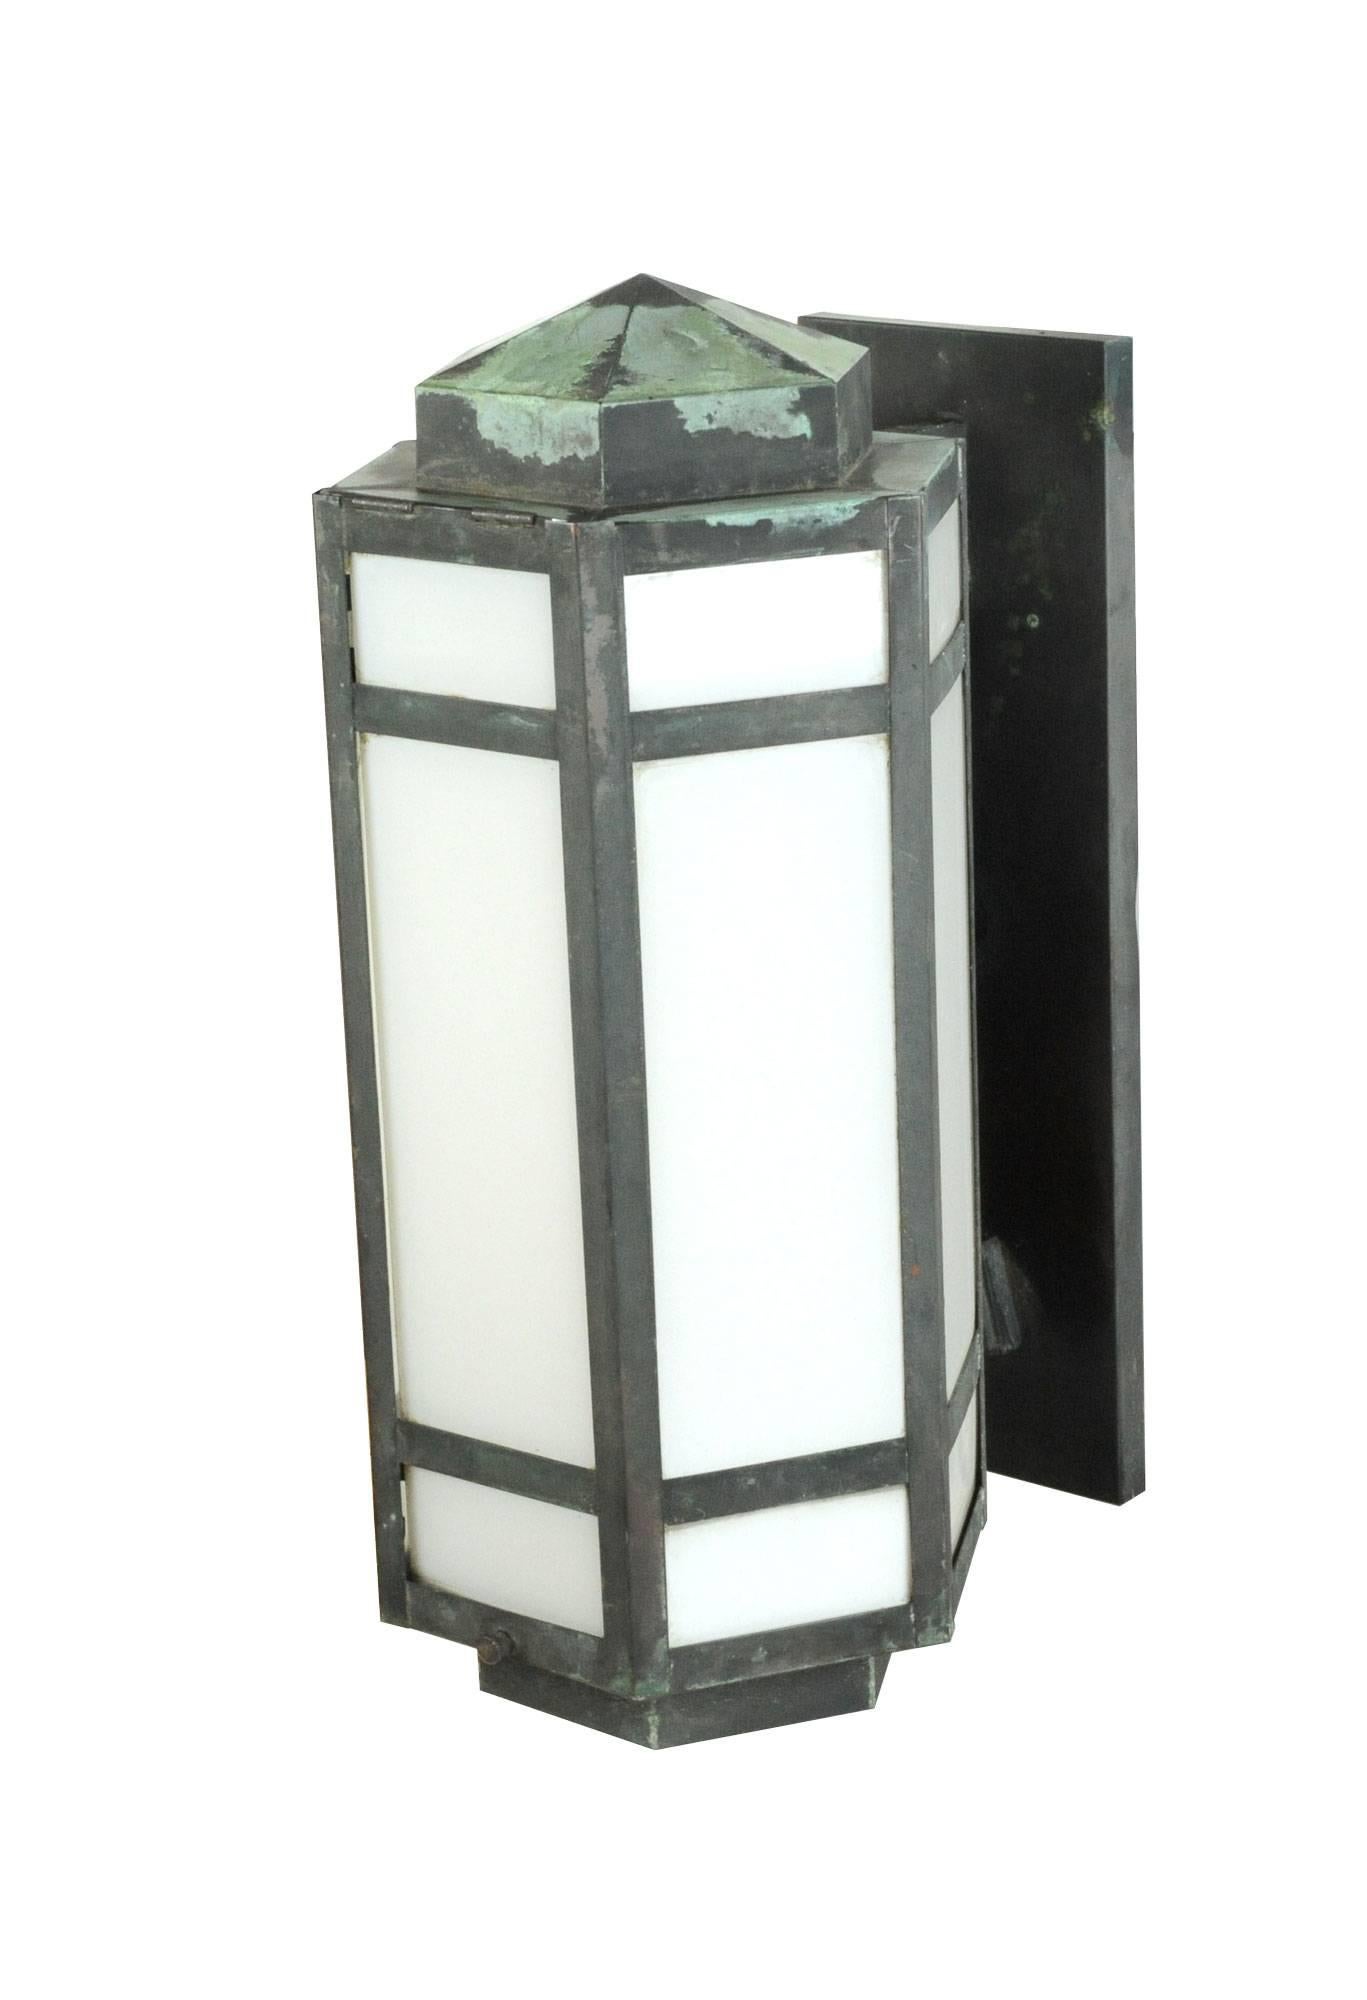 This impressive Art Deco exterior sconce is made with white glass panels and copper that has oxidized beautifully over time. Its hexagonal shape gives it added dimension. 

Contains one medium socket.
           